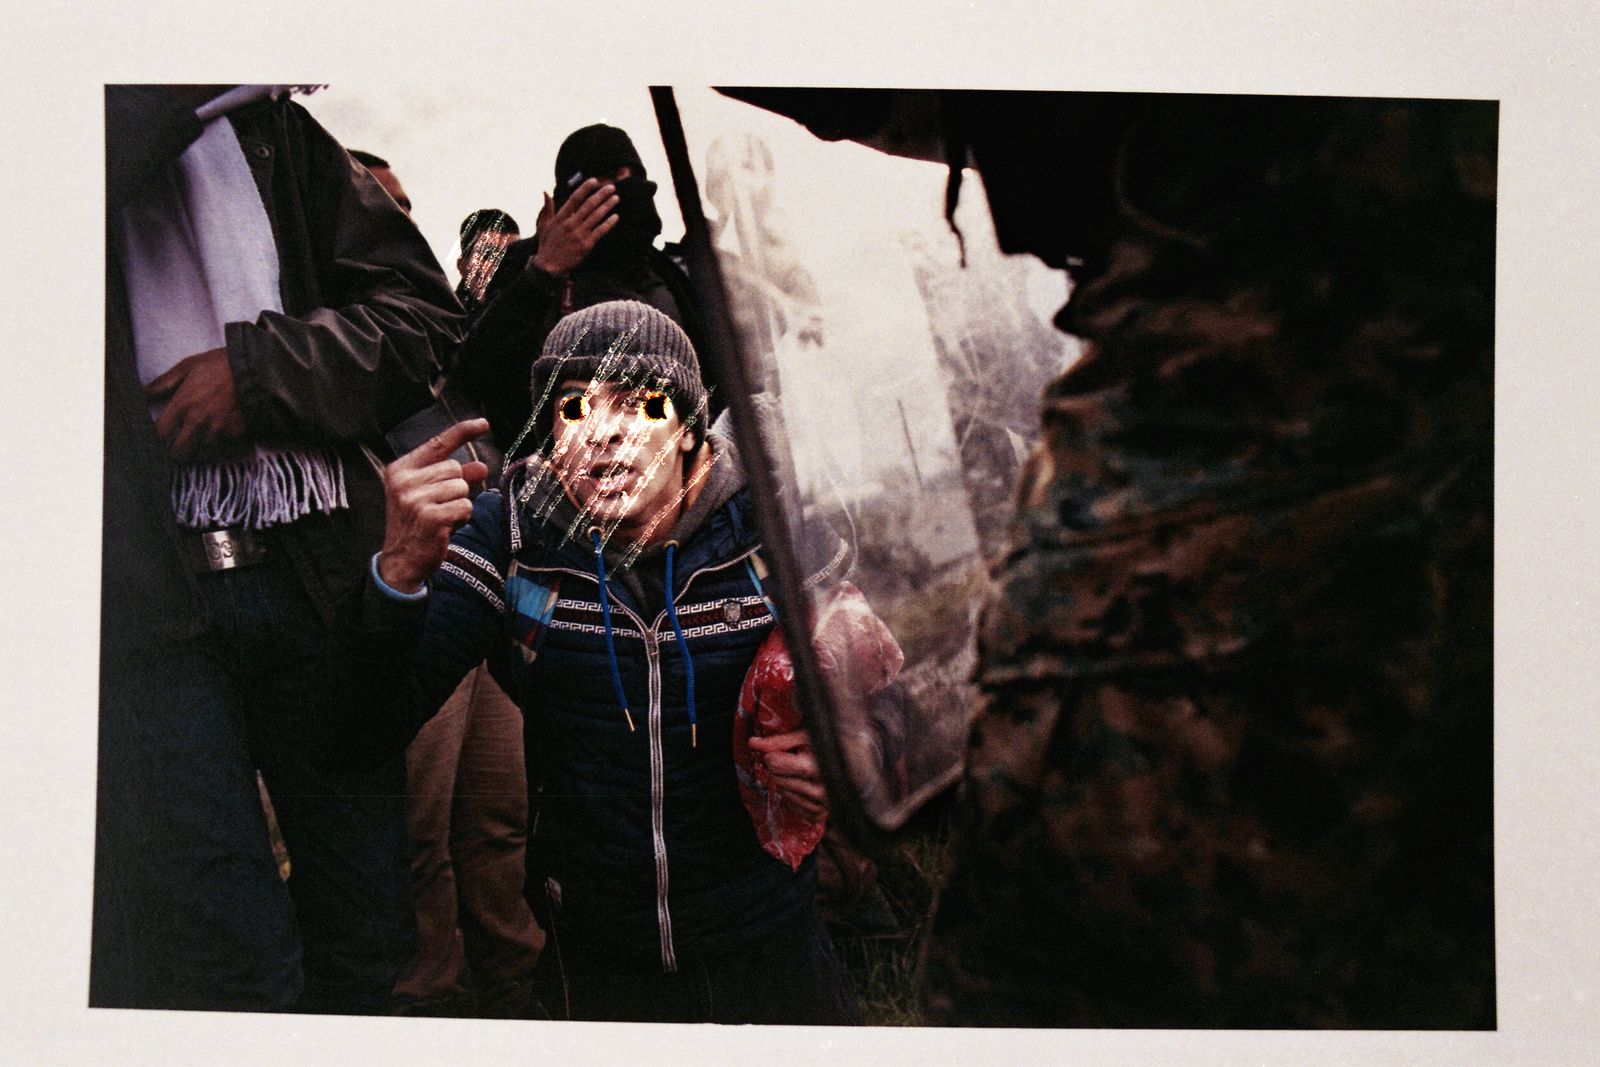 © Jesper Houborg - Image from the Forgetting the Refugee photography project